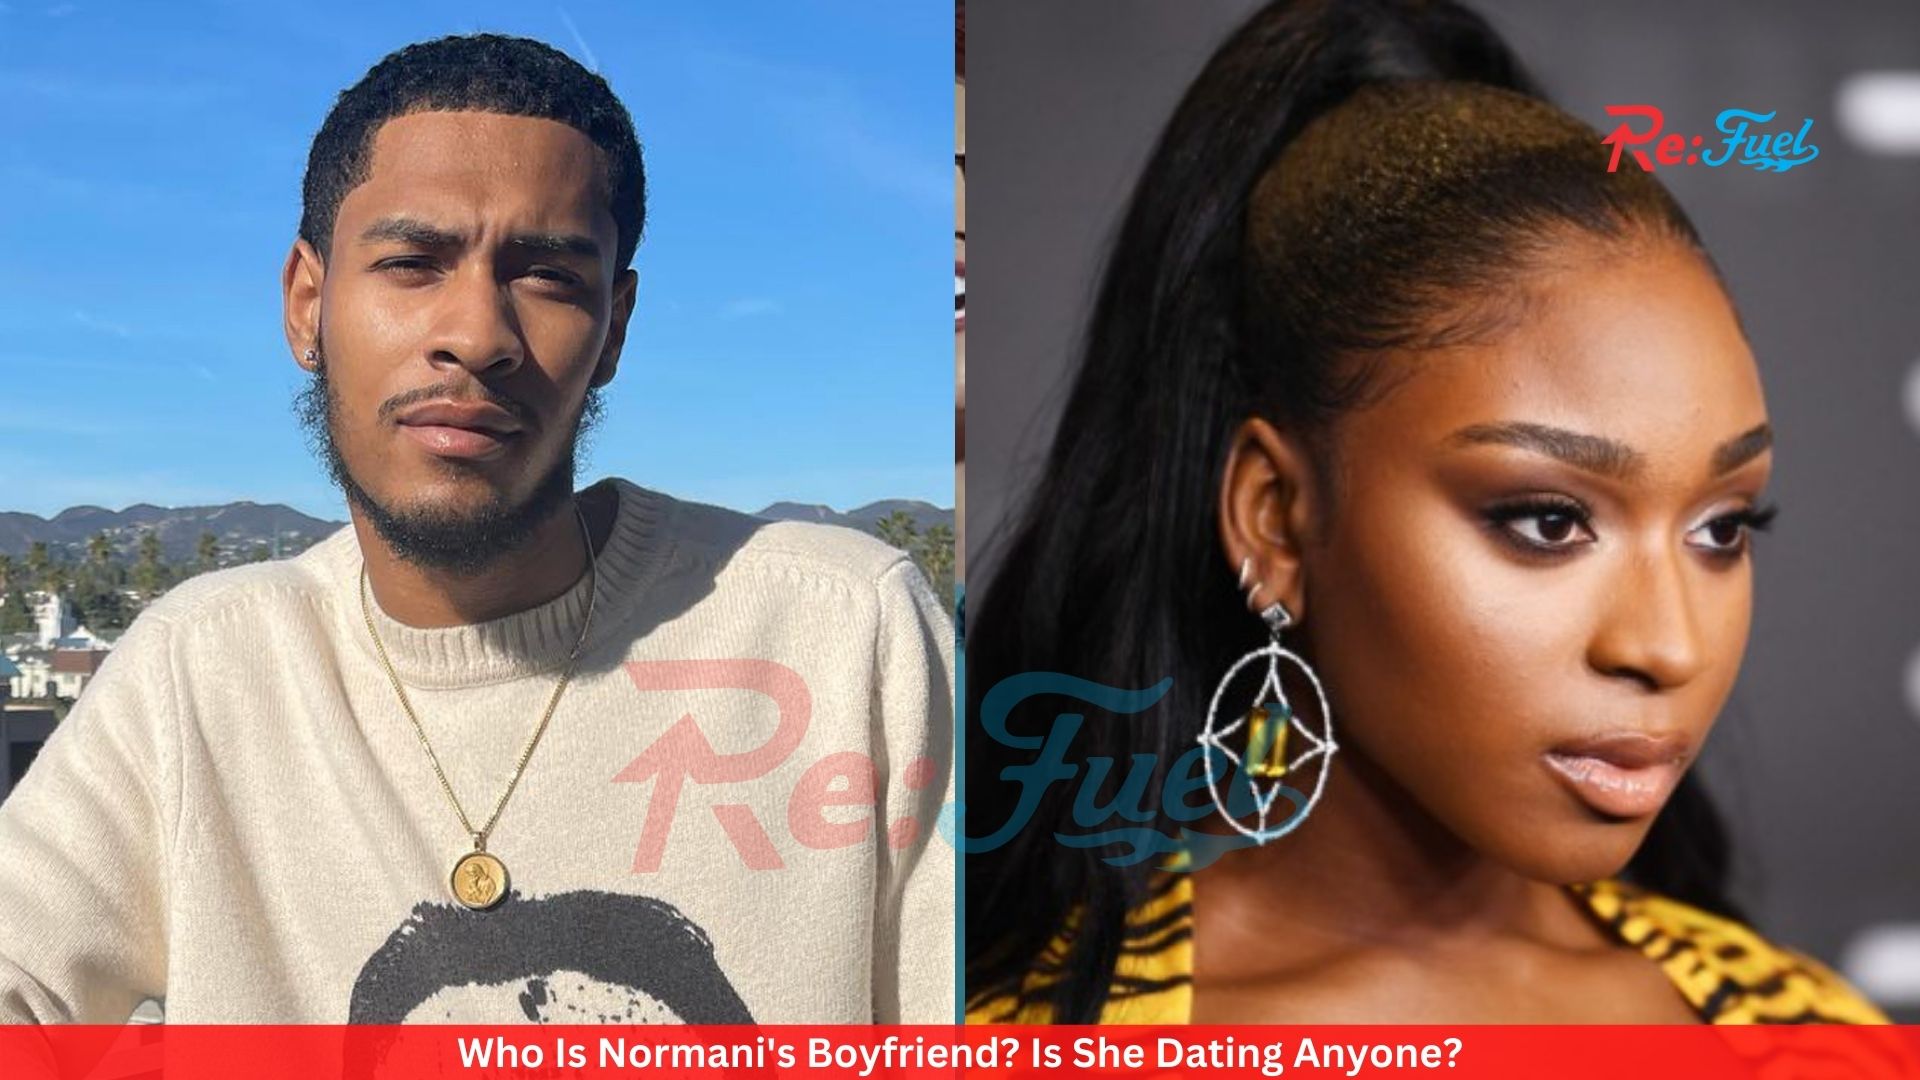 Who Is Normani's Boyfriend? Is She Dating Anyone?